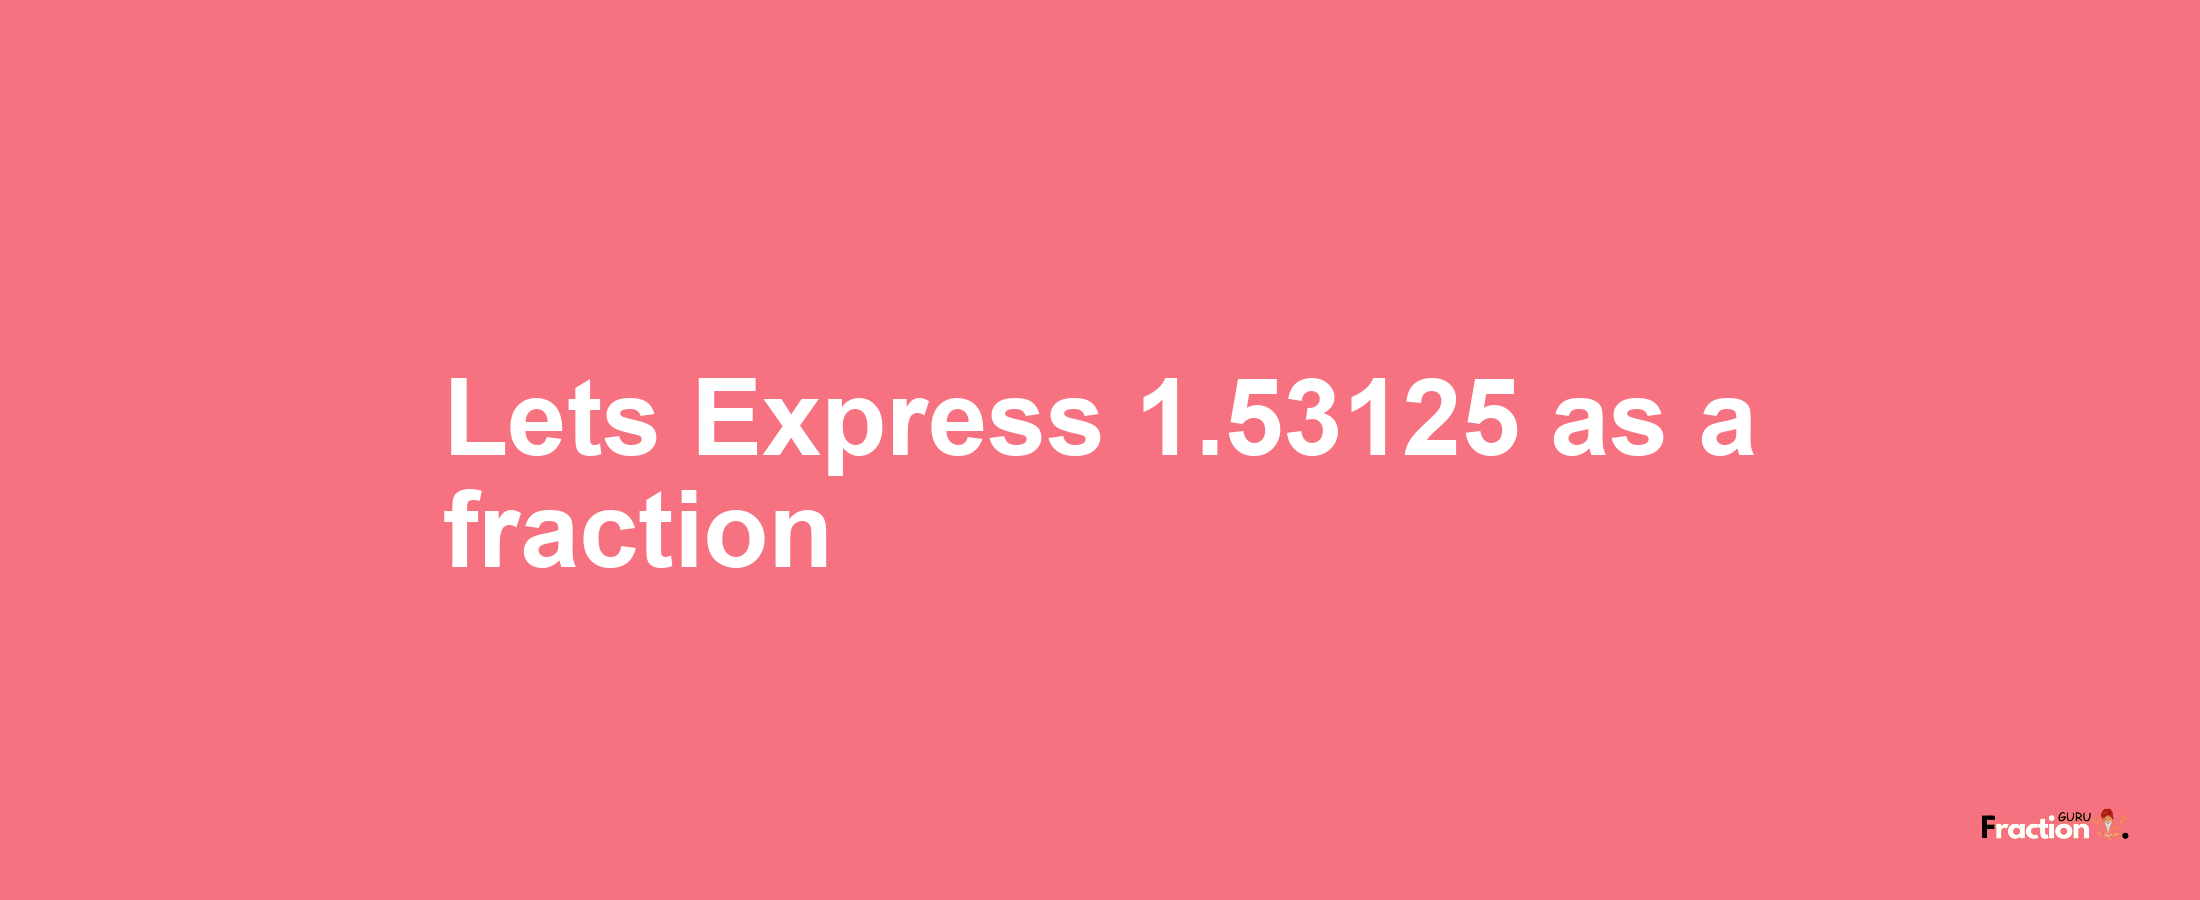 Lets Express 1.53125 as afraction